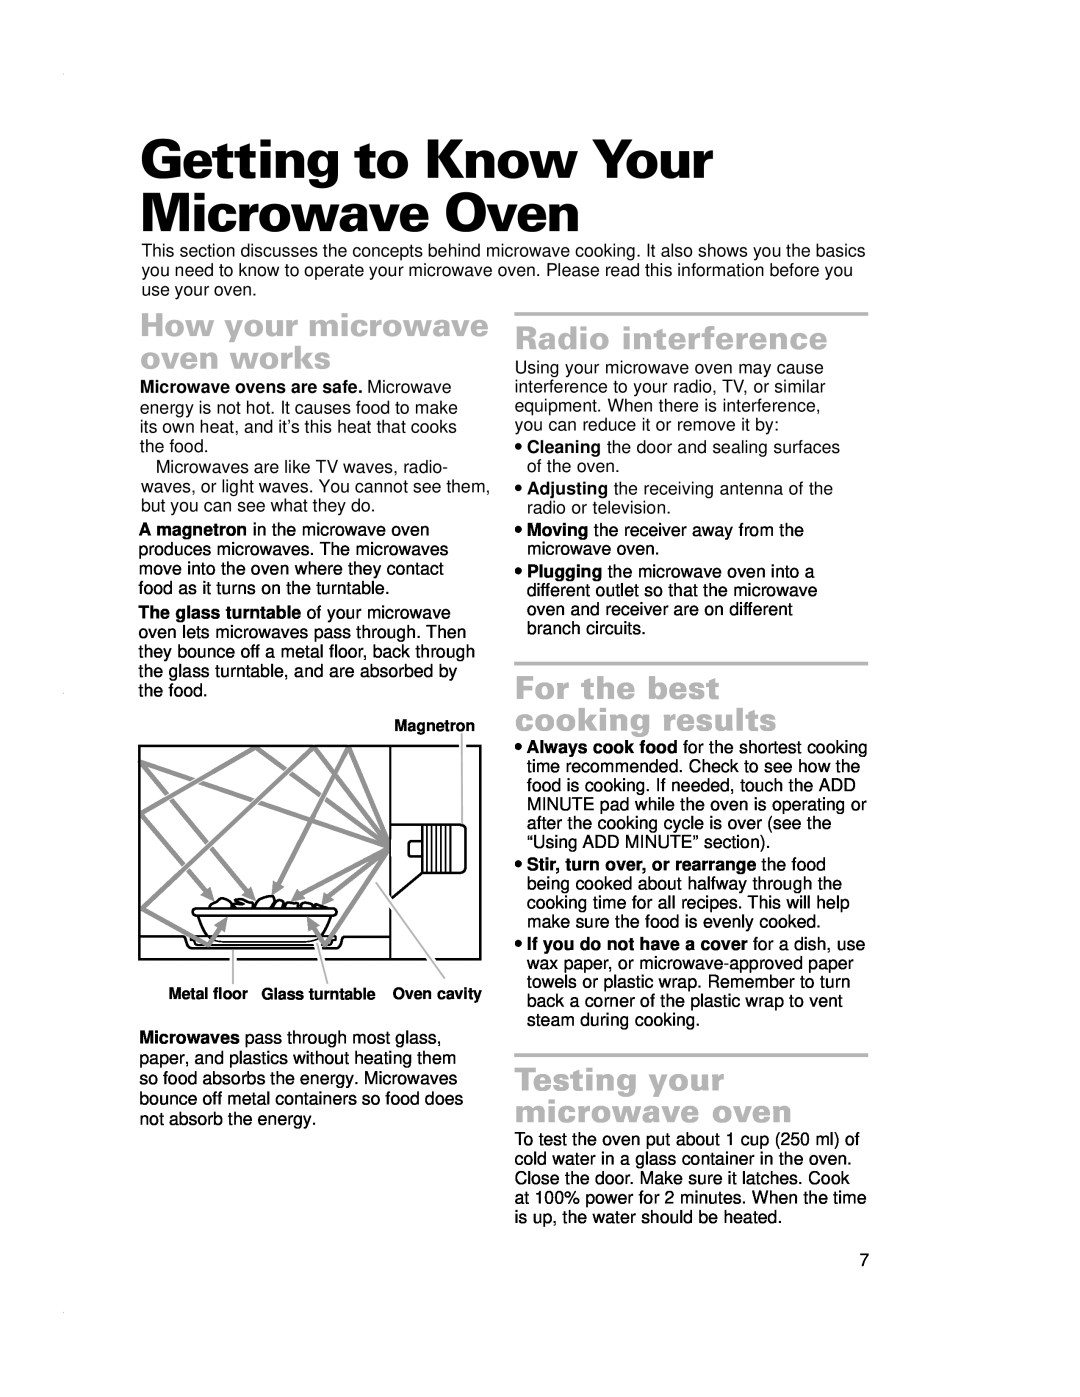 Crosley CMT135SG Getting to Know Your Microwave Oven, How your microwave oven works, Radio interference 